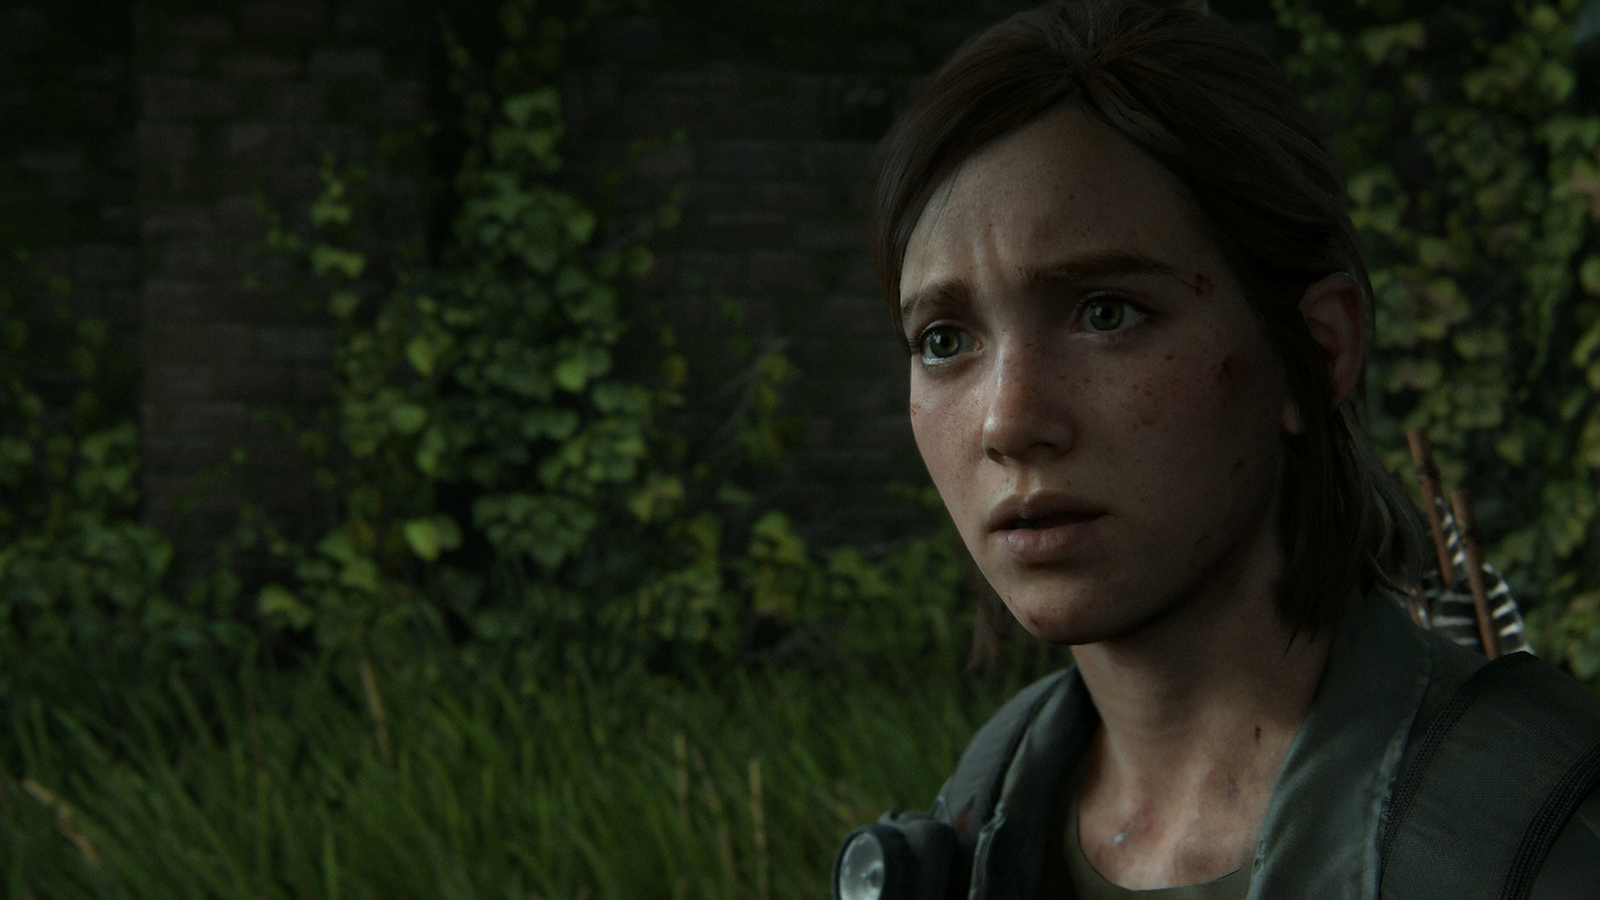 The Last of Us Part 2 multiplayer launching as a stand-alone game - Polygon